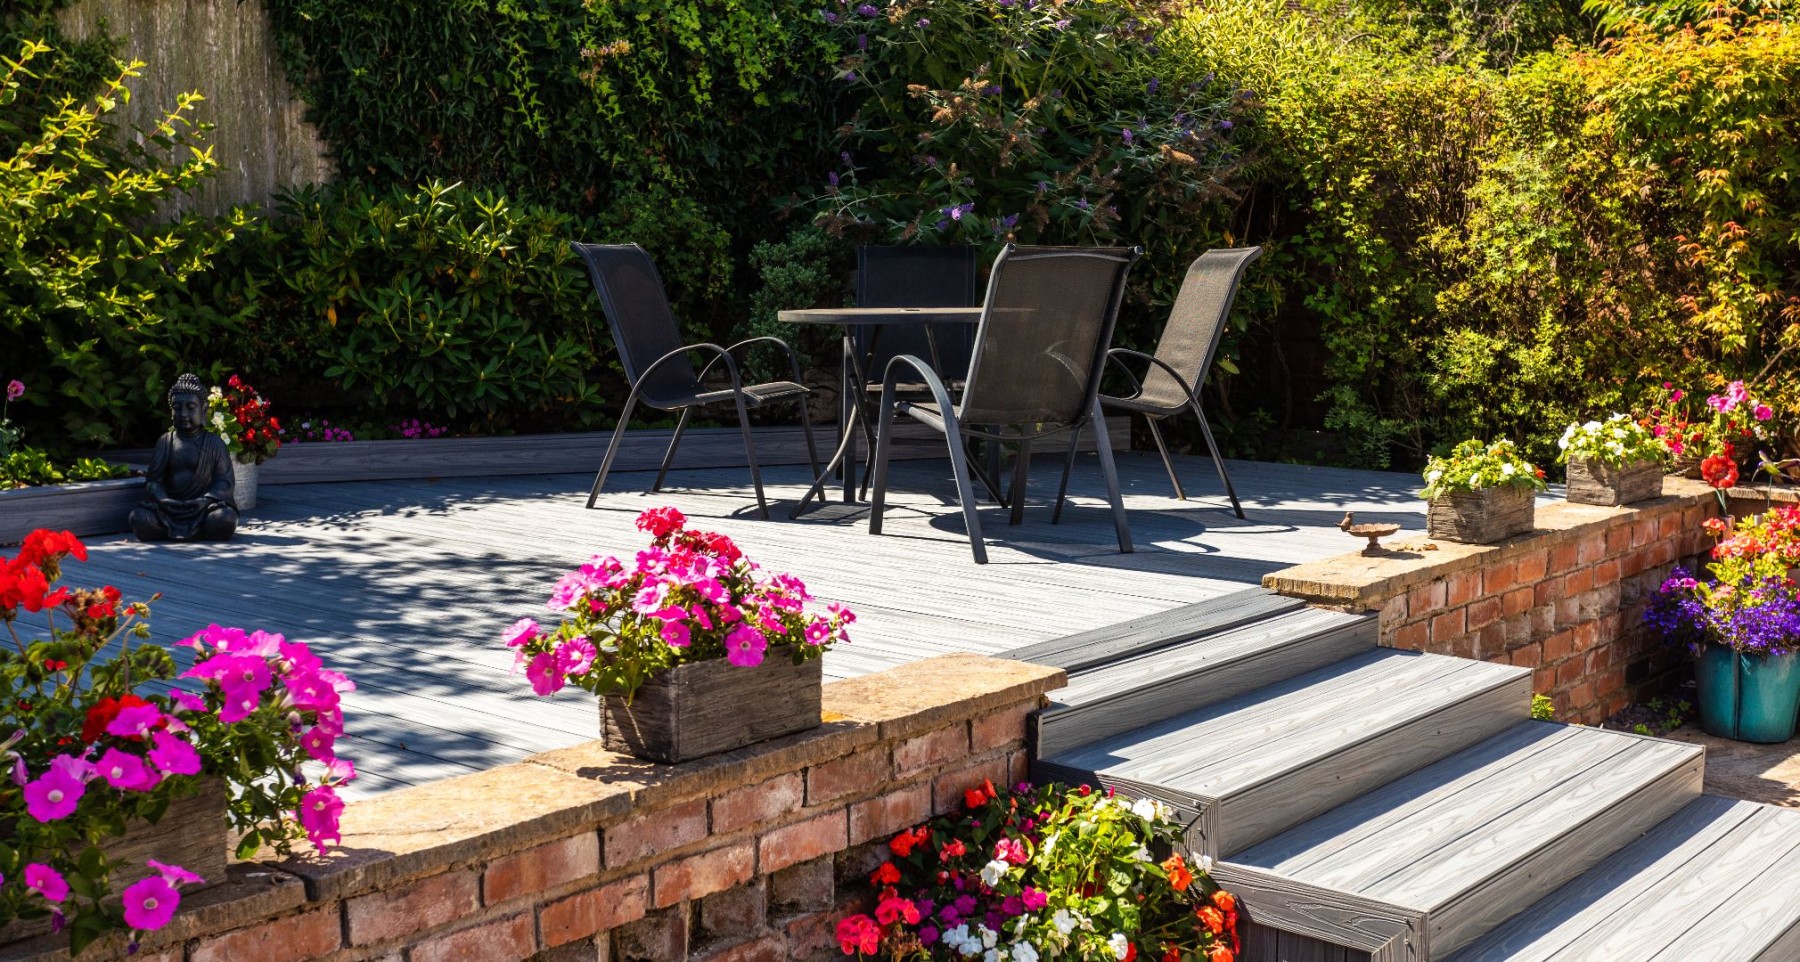 Composite decking from Alchemy